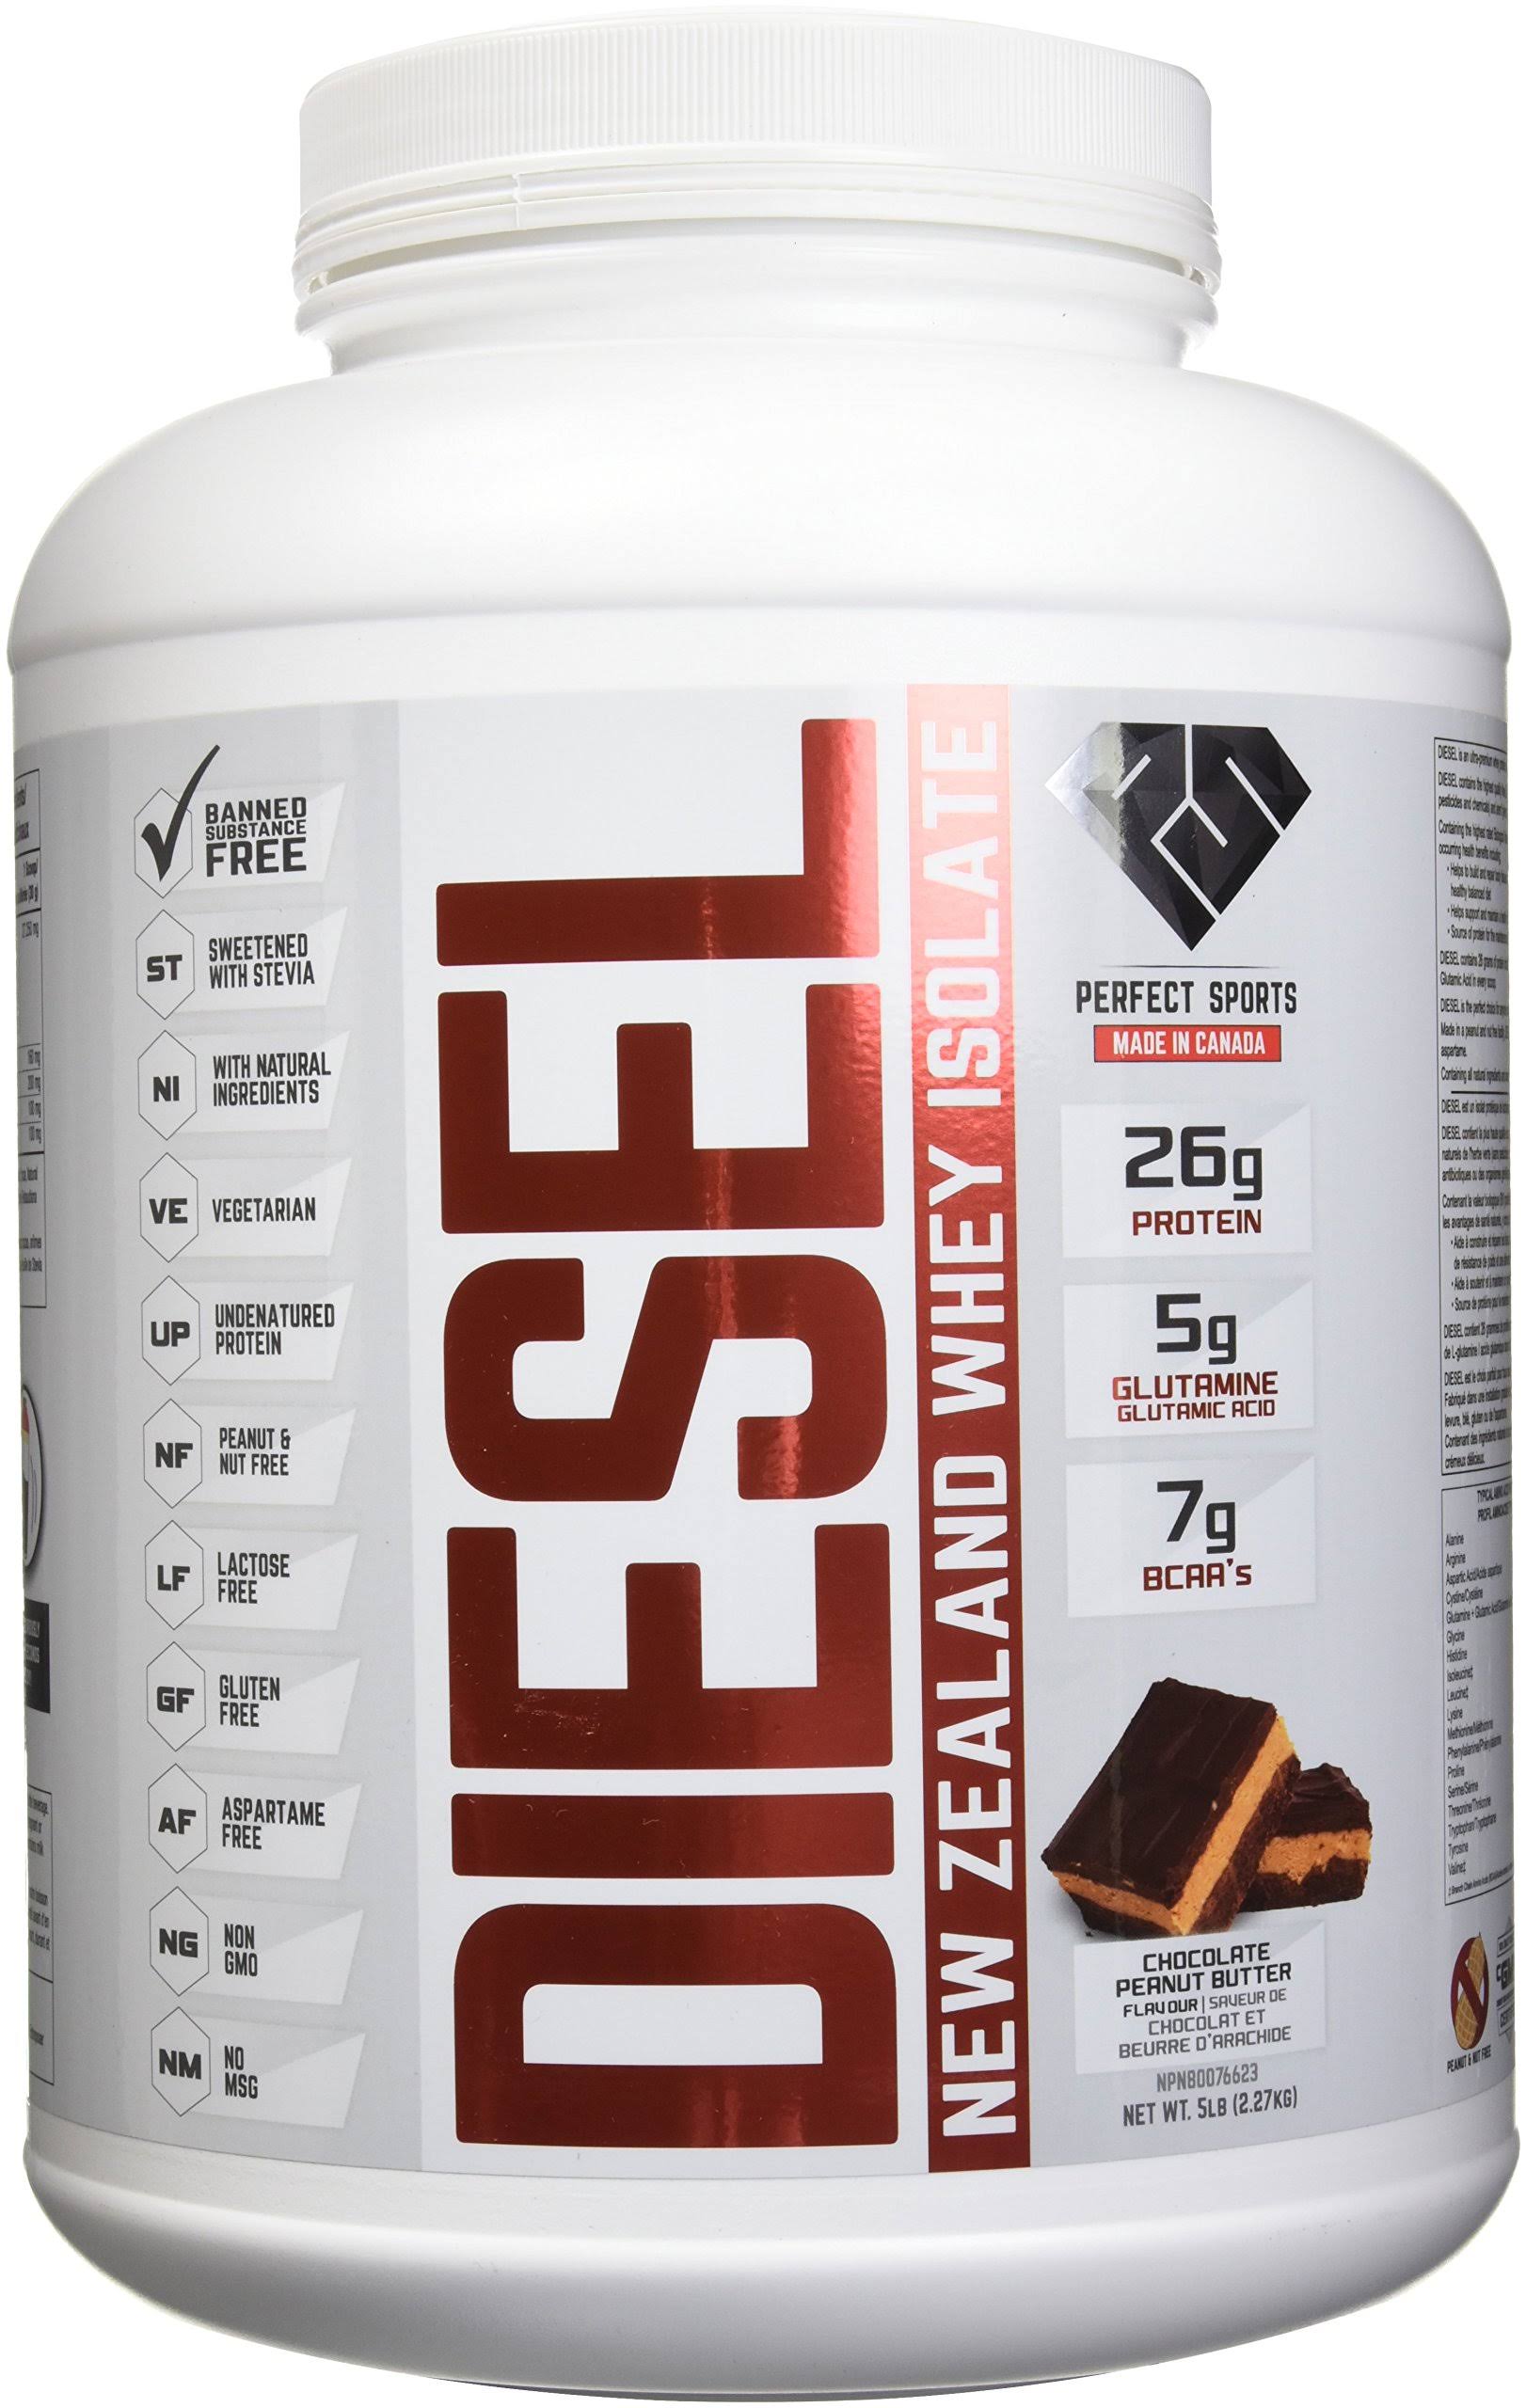 Diesel New Zealand Protein Whey Isolate - Chocolate Peanut Butter, 5lbs